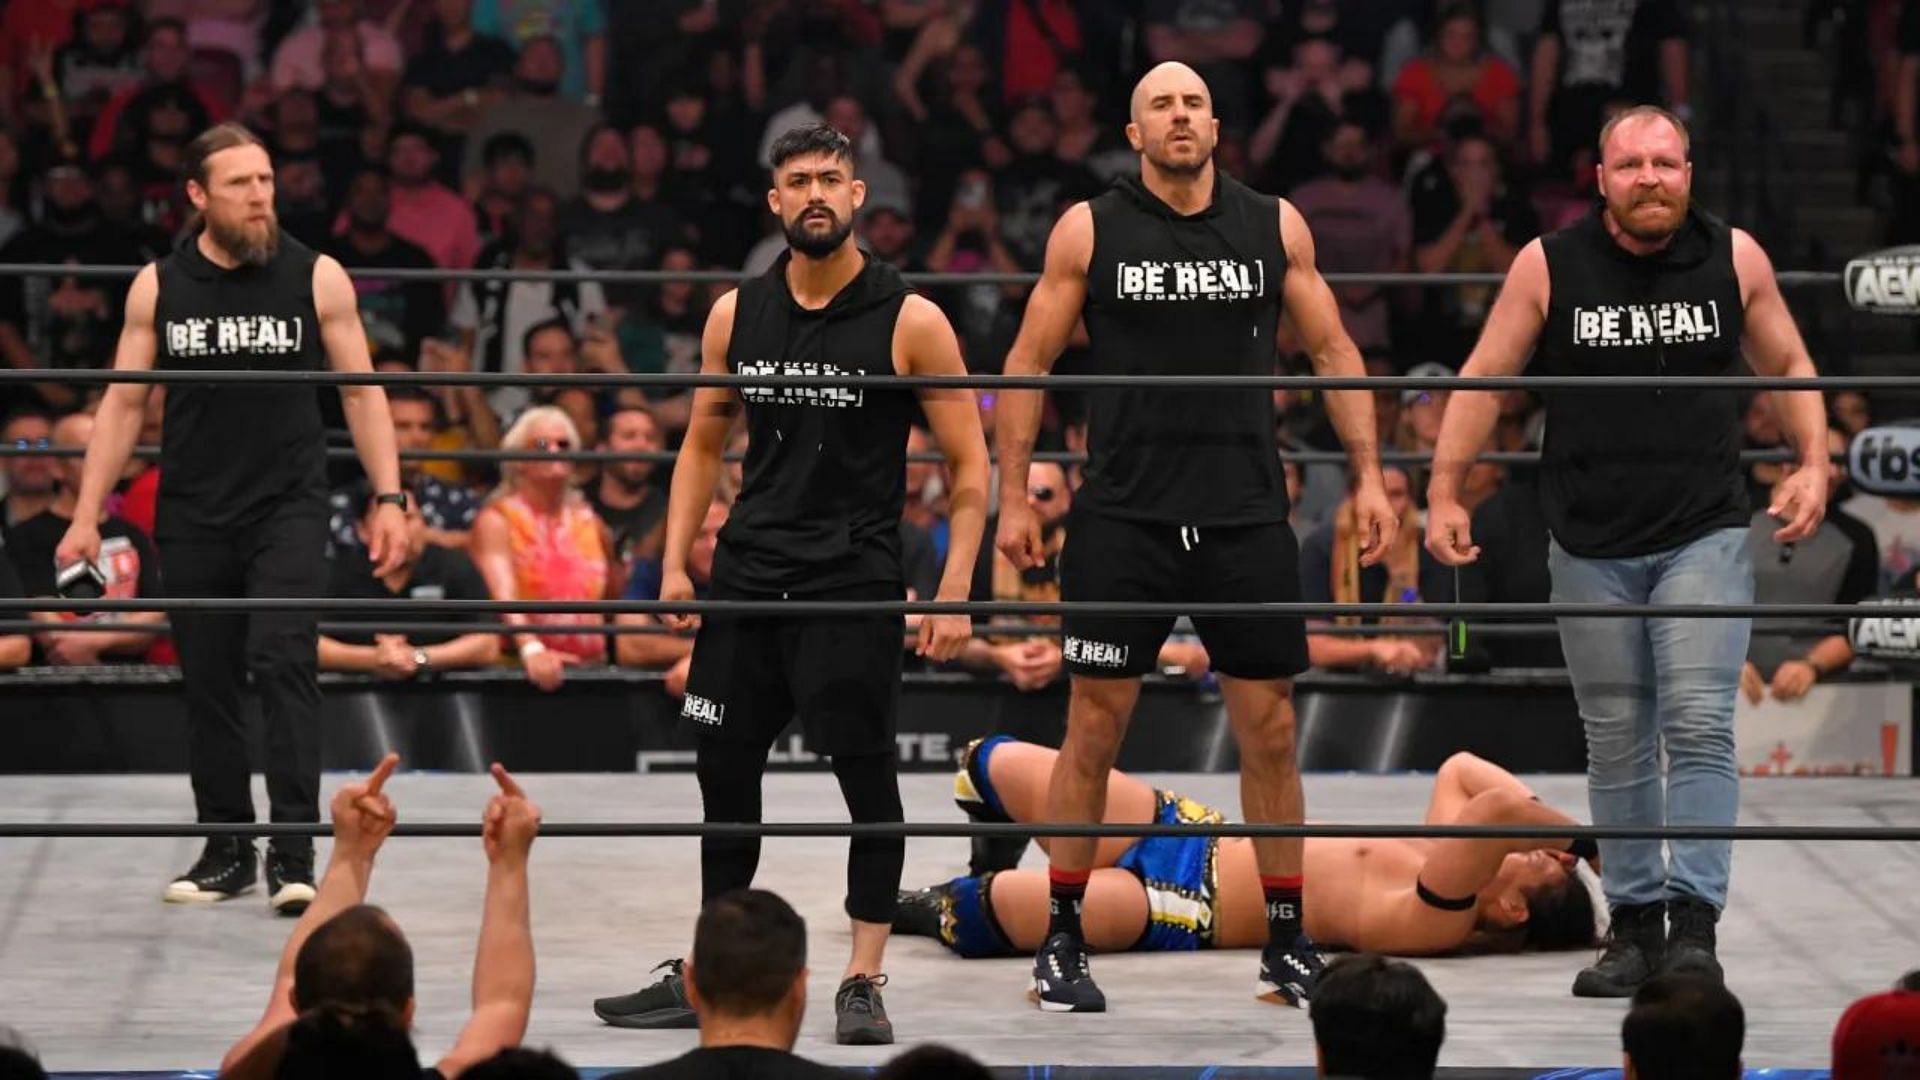 The Blackpool Combat Club is one of the top factions in AEW